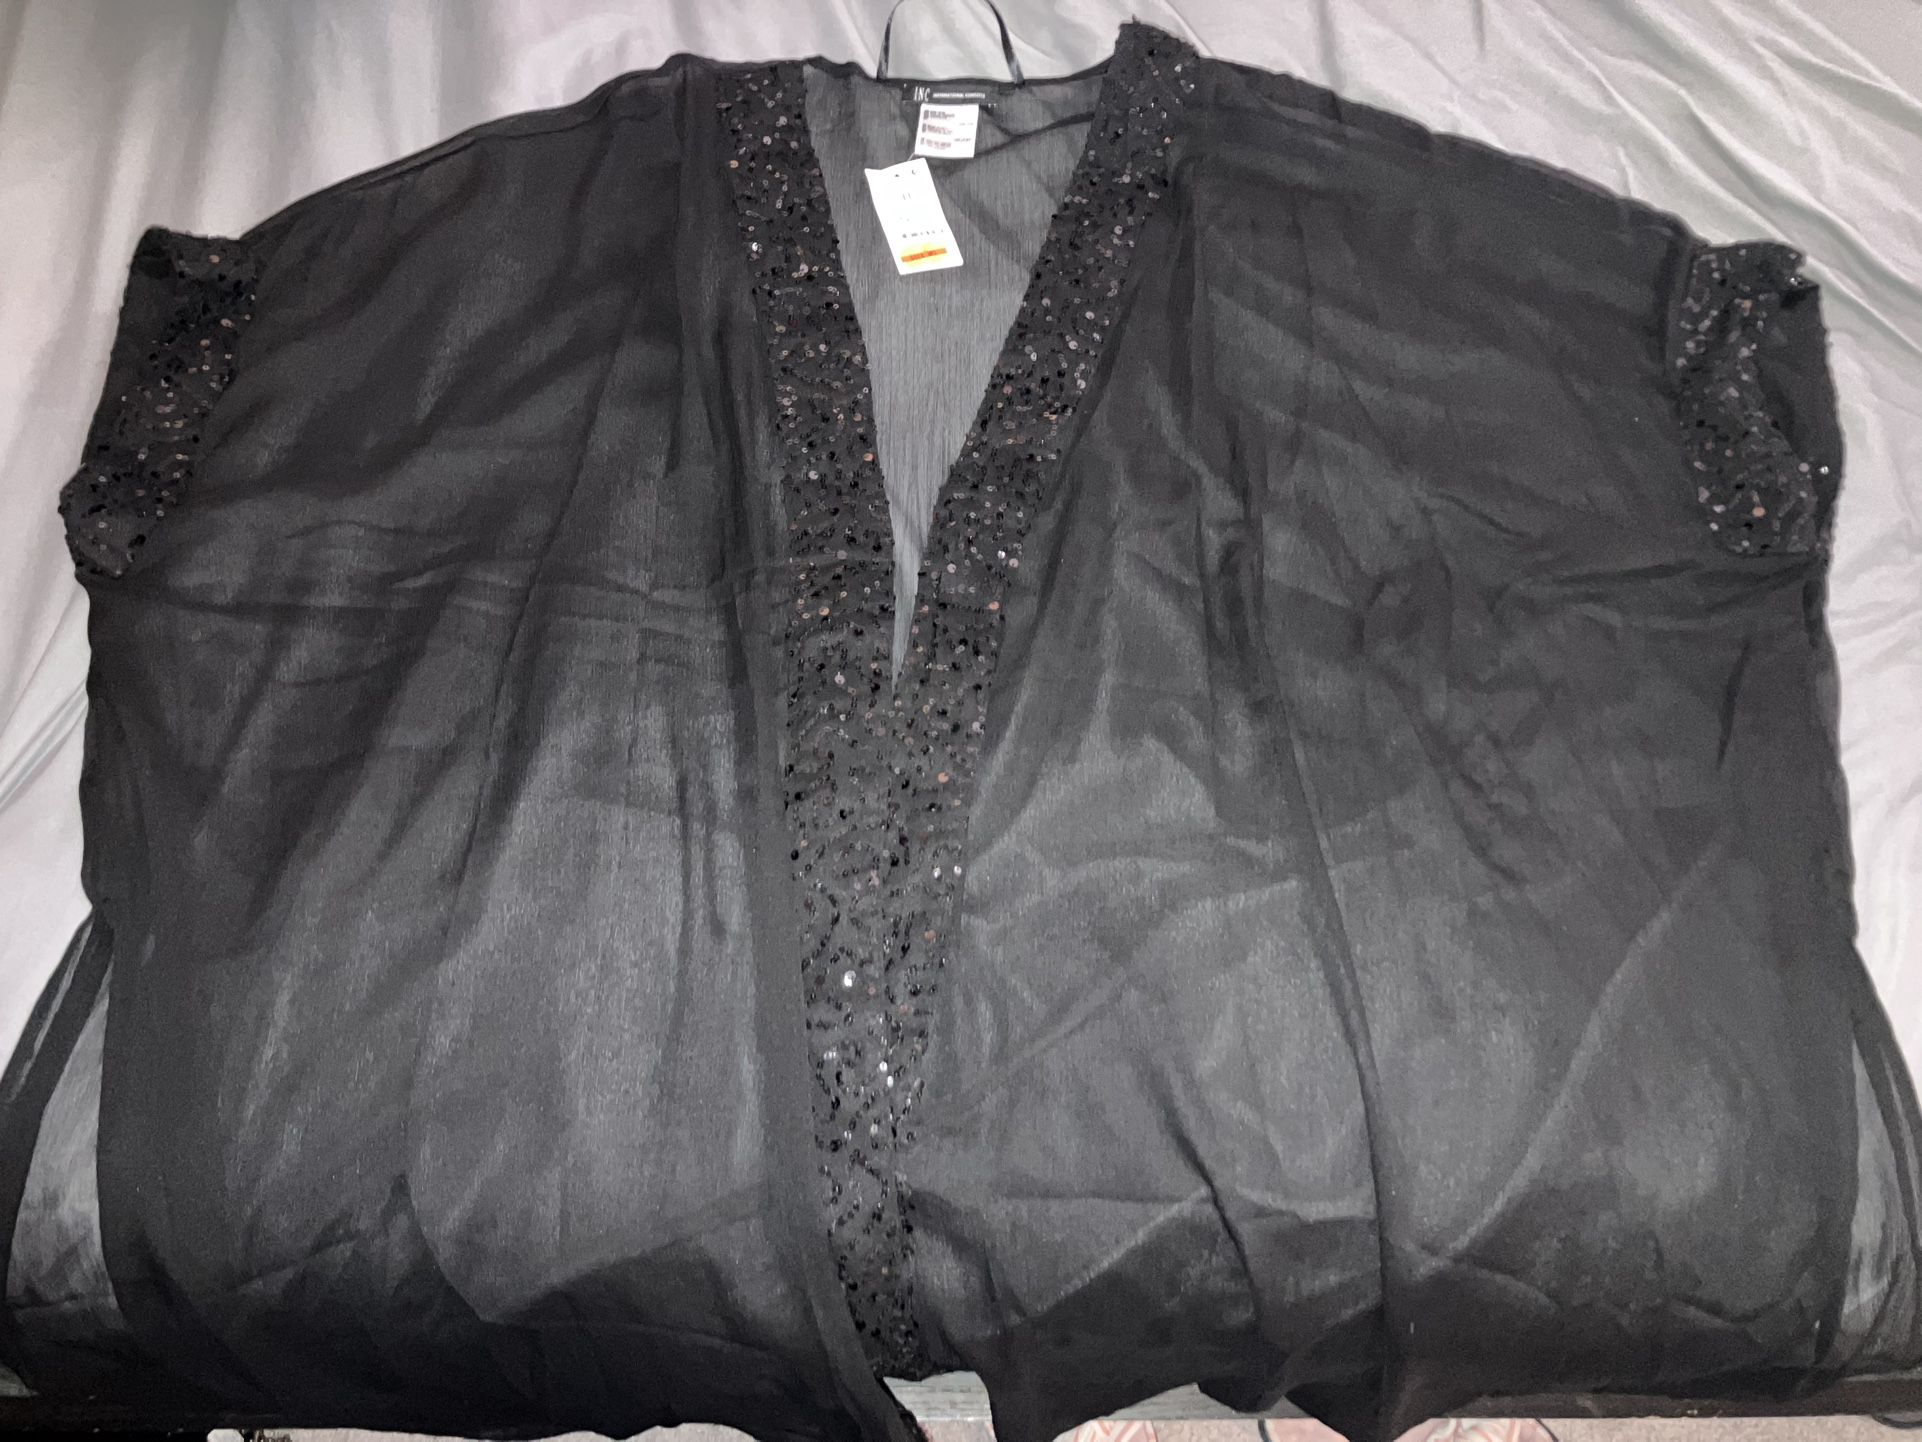 Brand new with tags black sheer sequin cover up